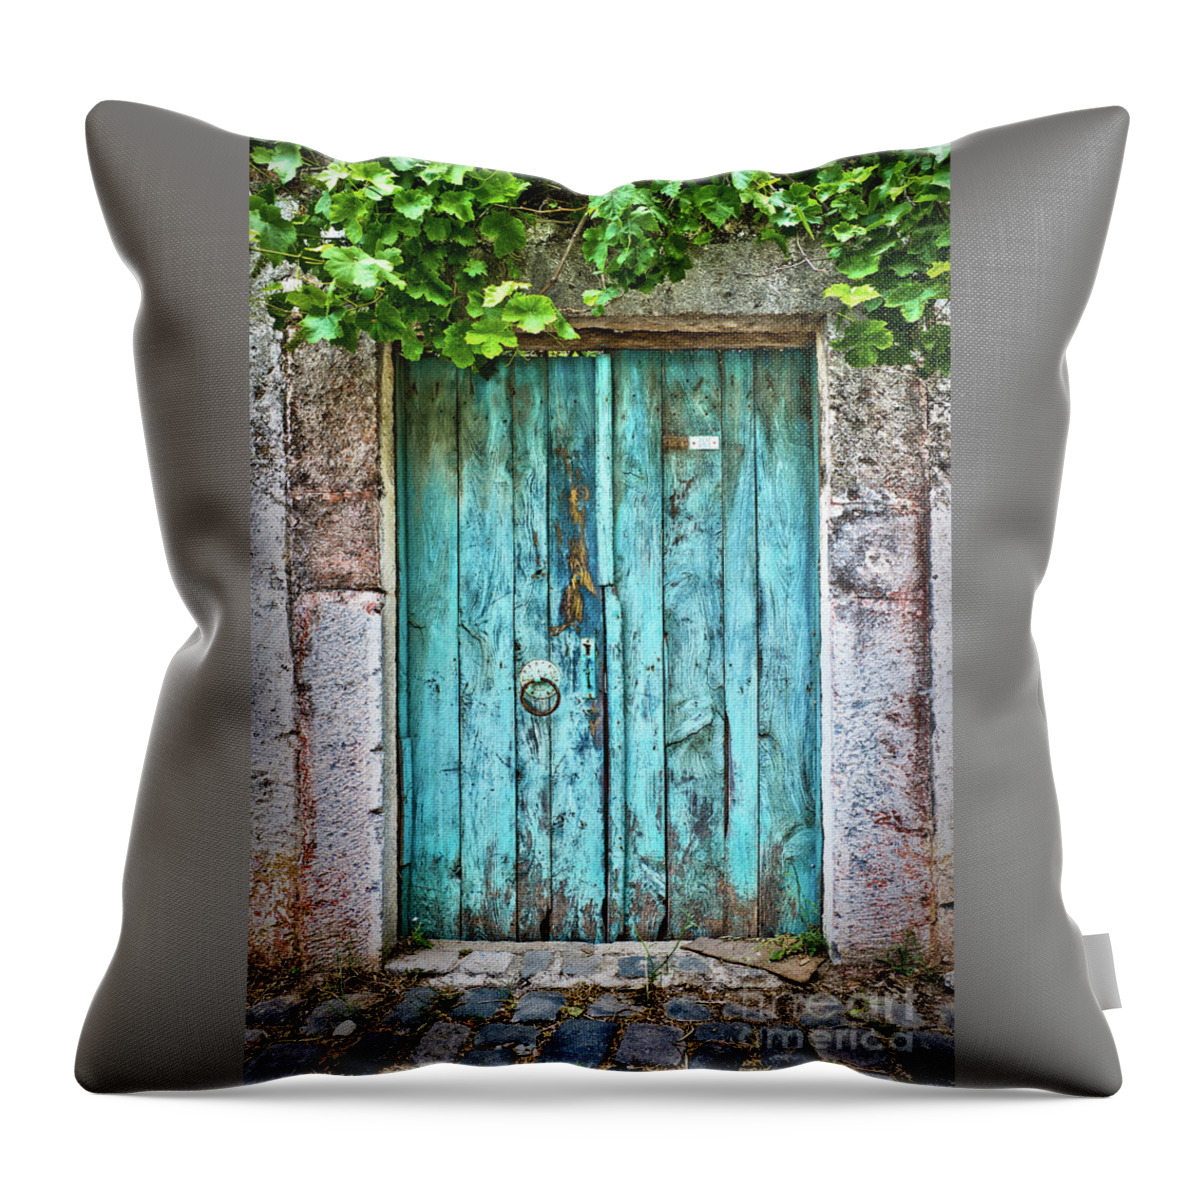 Blue Throw Pillow featuring the photograph Old blue door with vine by Delphimages Photo Creations